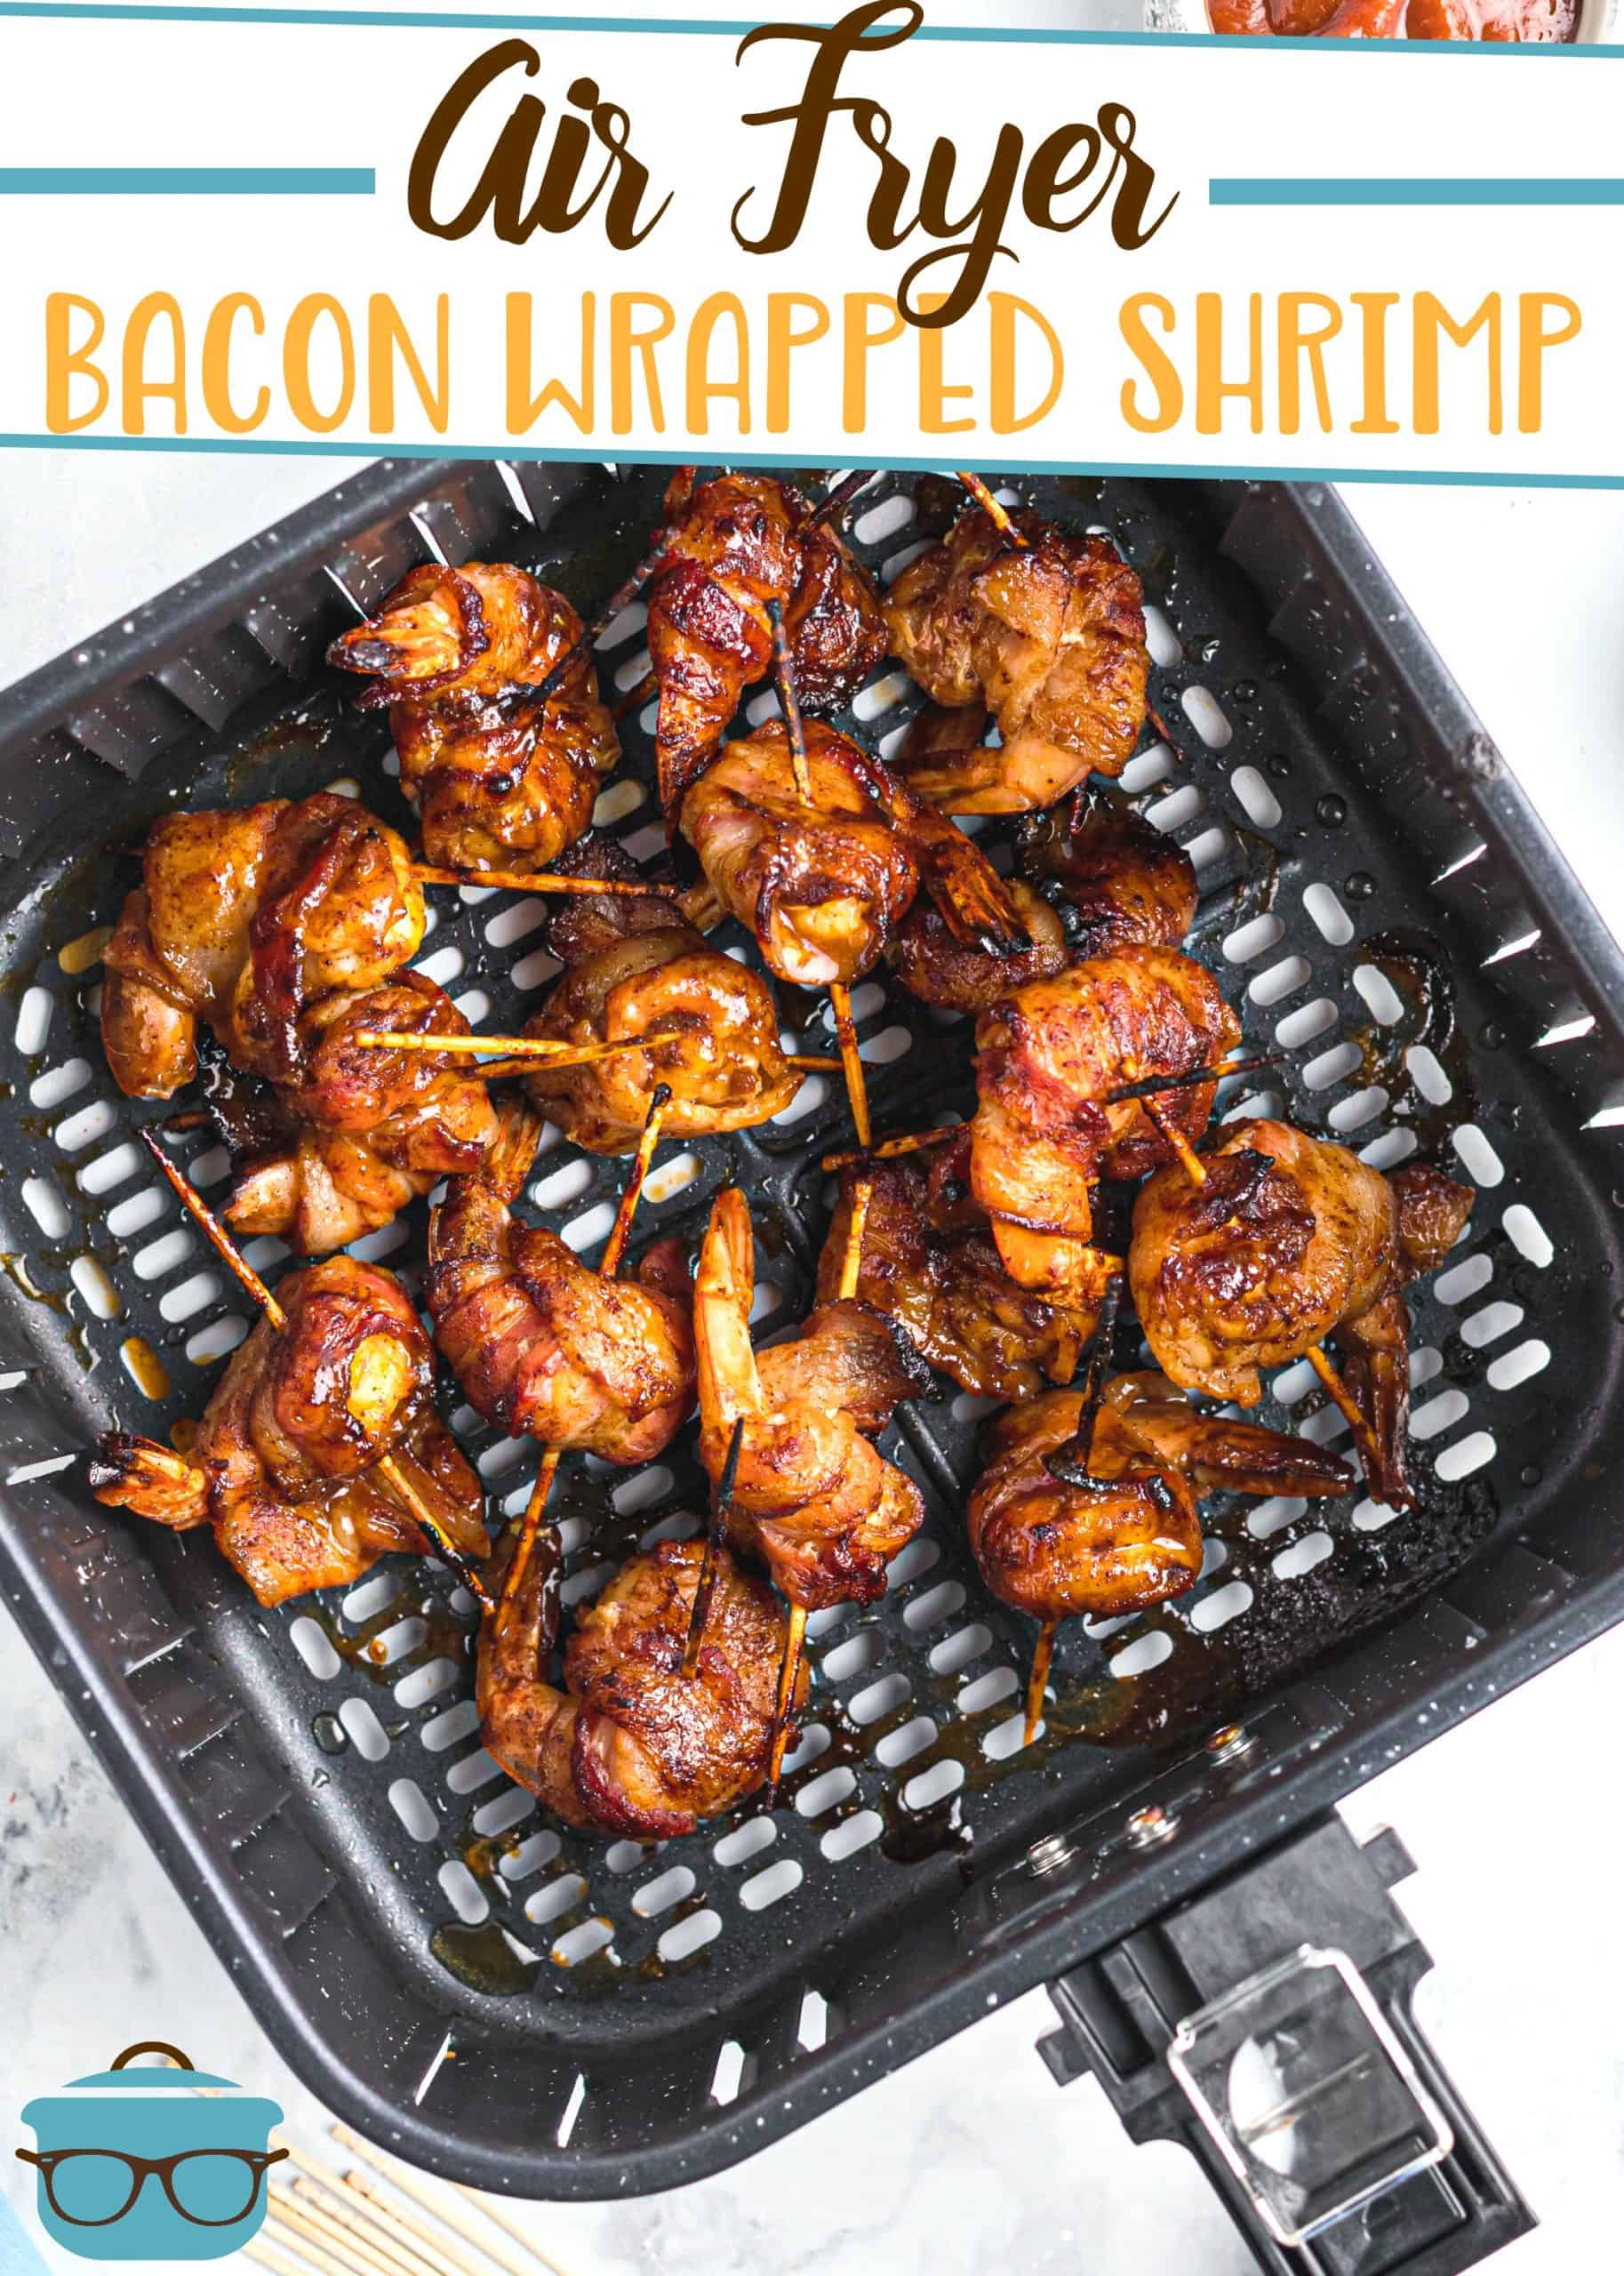 AIR FRYER BACON WRAPPED SHRIMP recipe from The Country Cook, pictured, cooked shrimp in an air fryer basket.